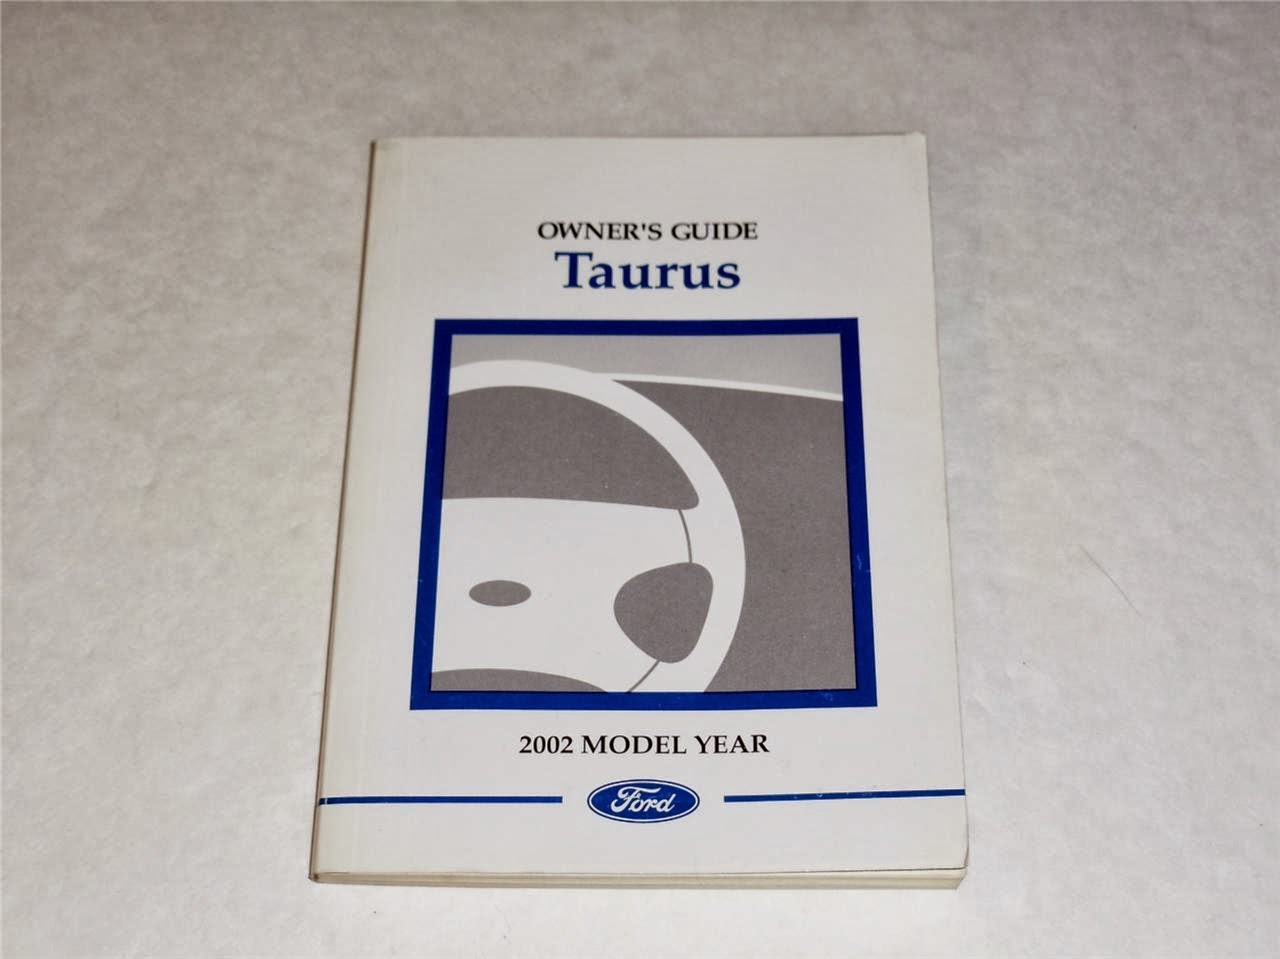 1993 Ford taurus owners manual download #5